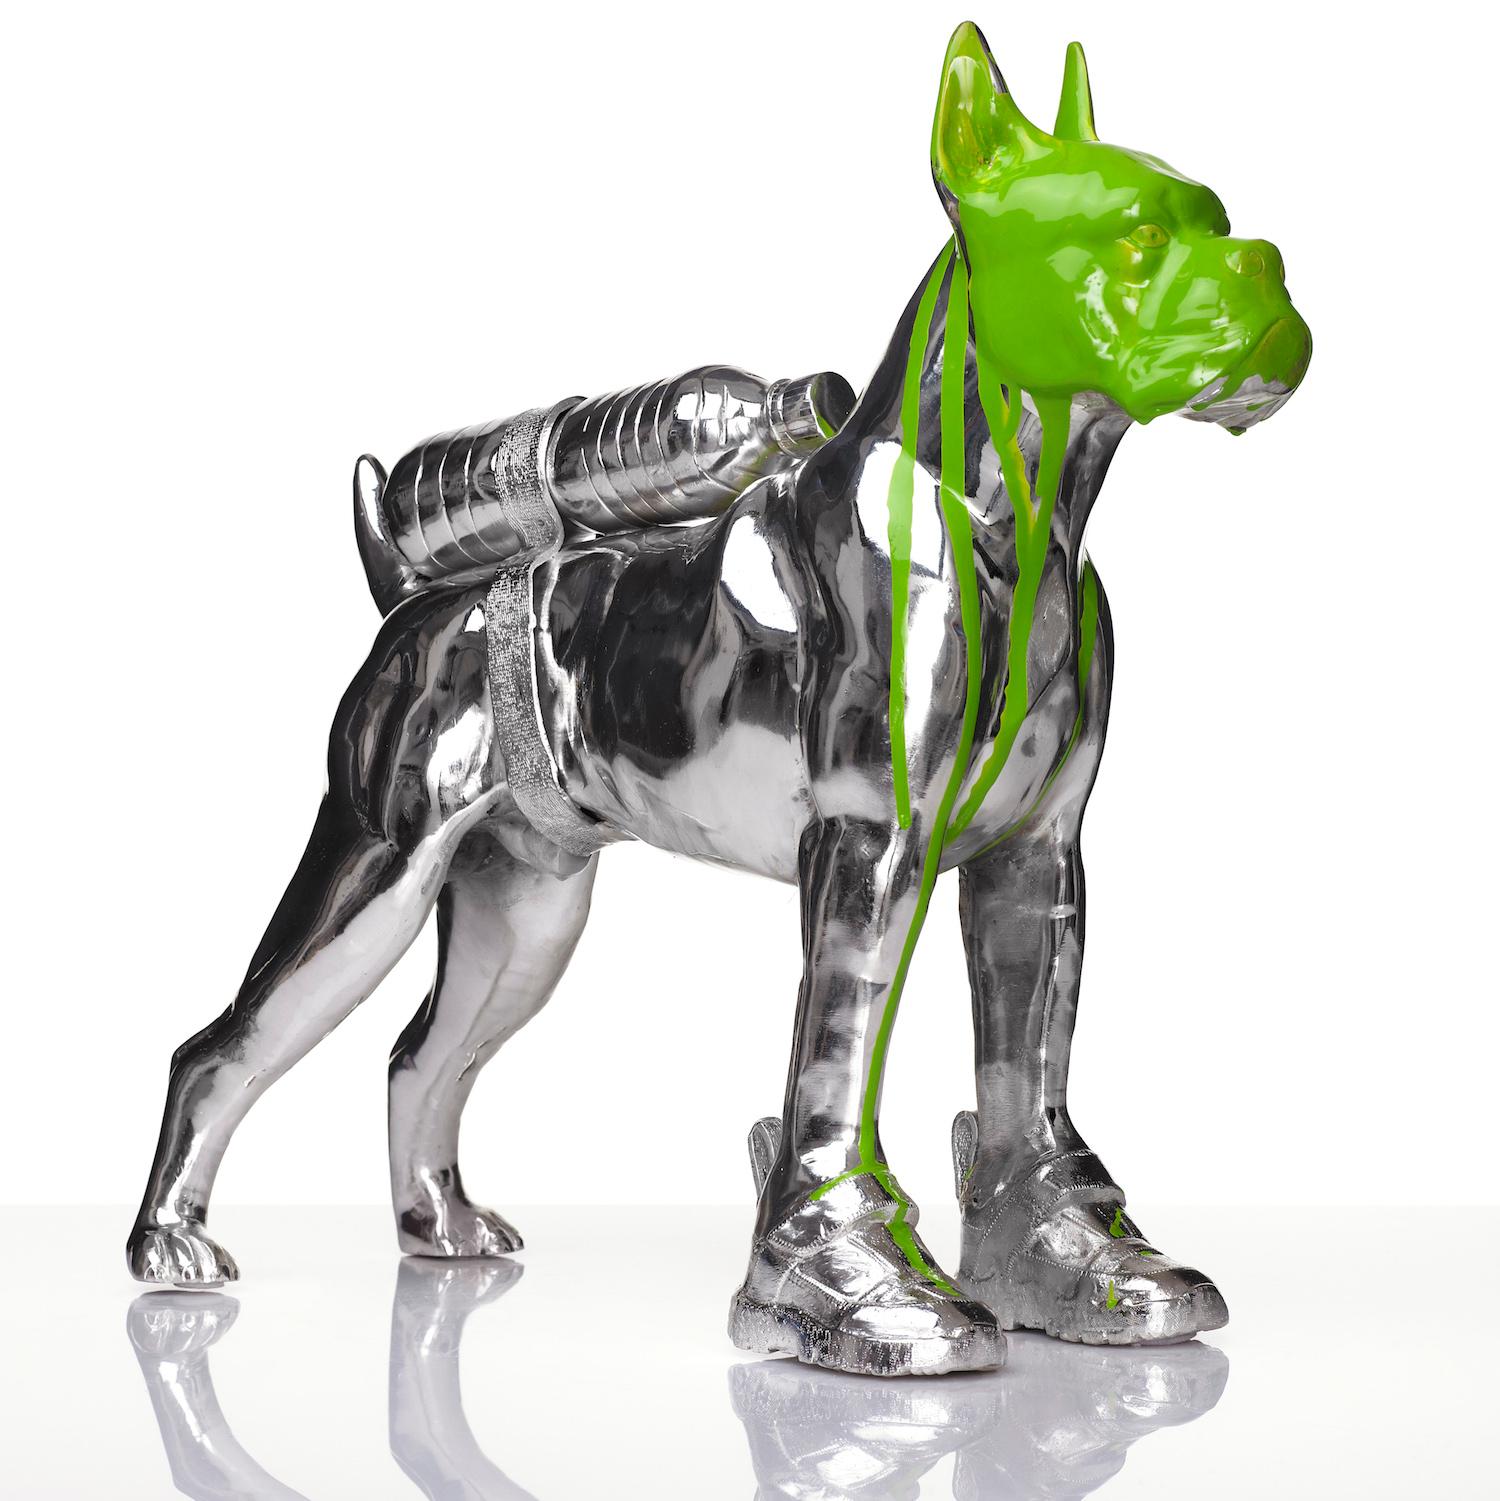 Cloned Bulldog with pet bottle - Sculpture by William Sweetlove